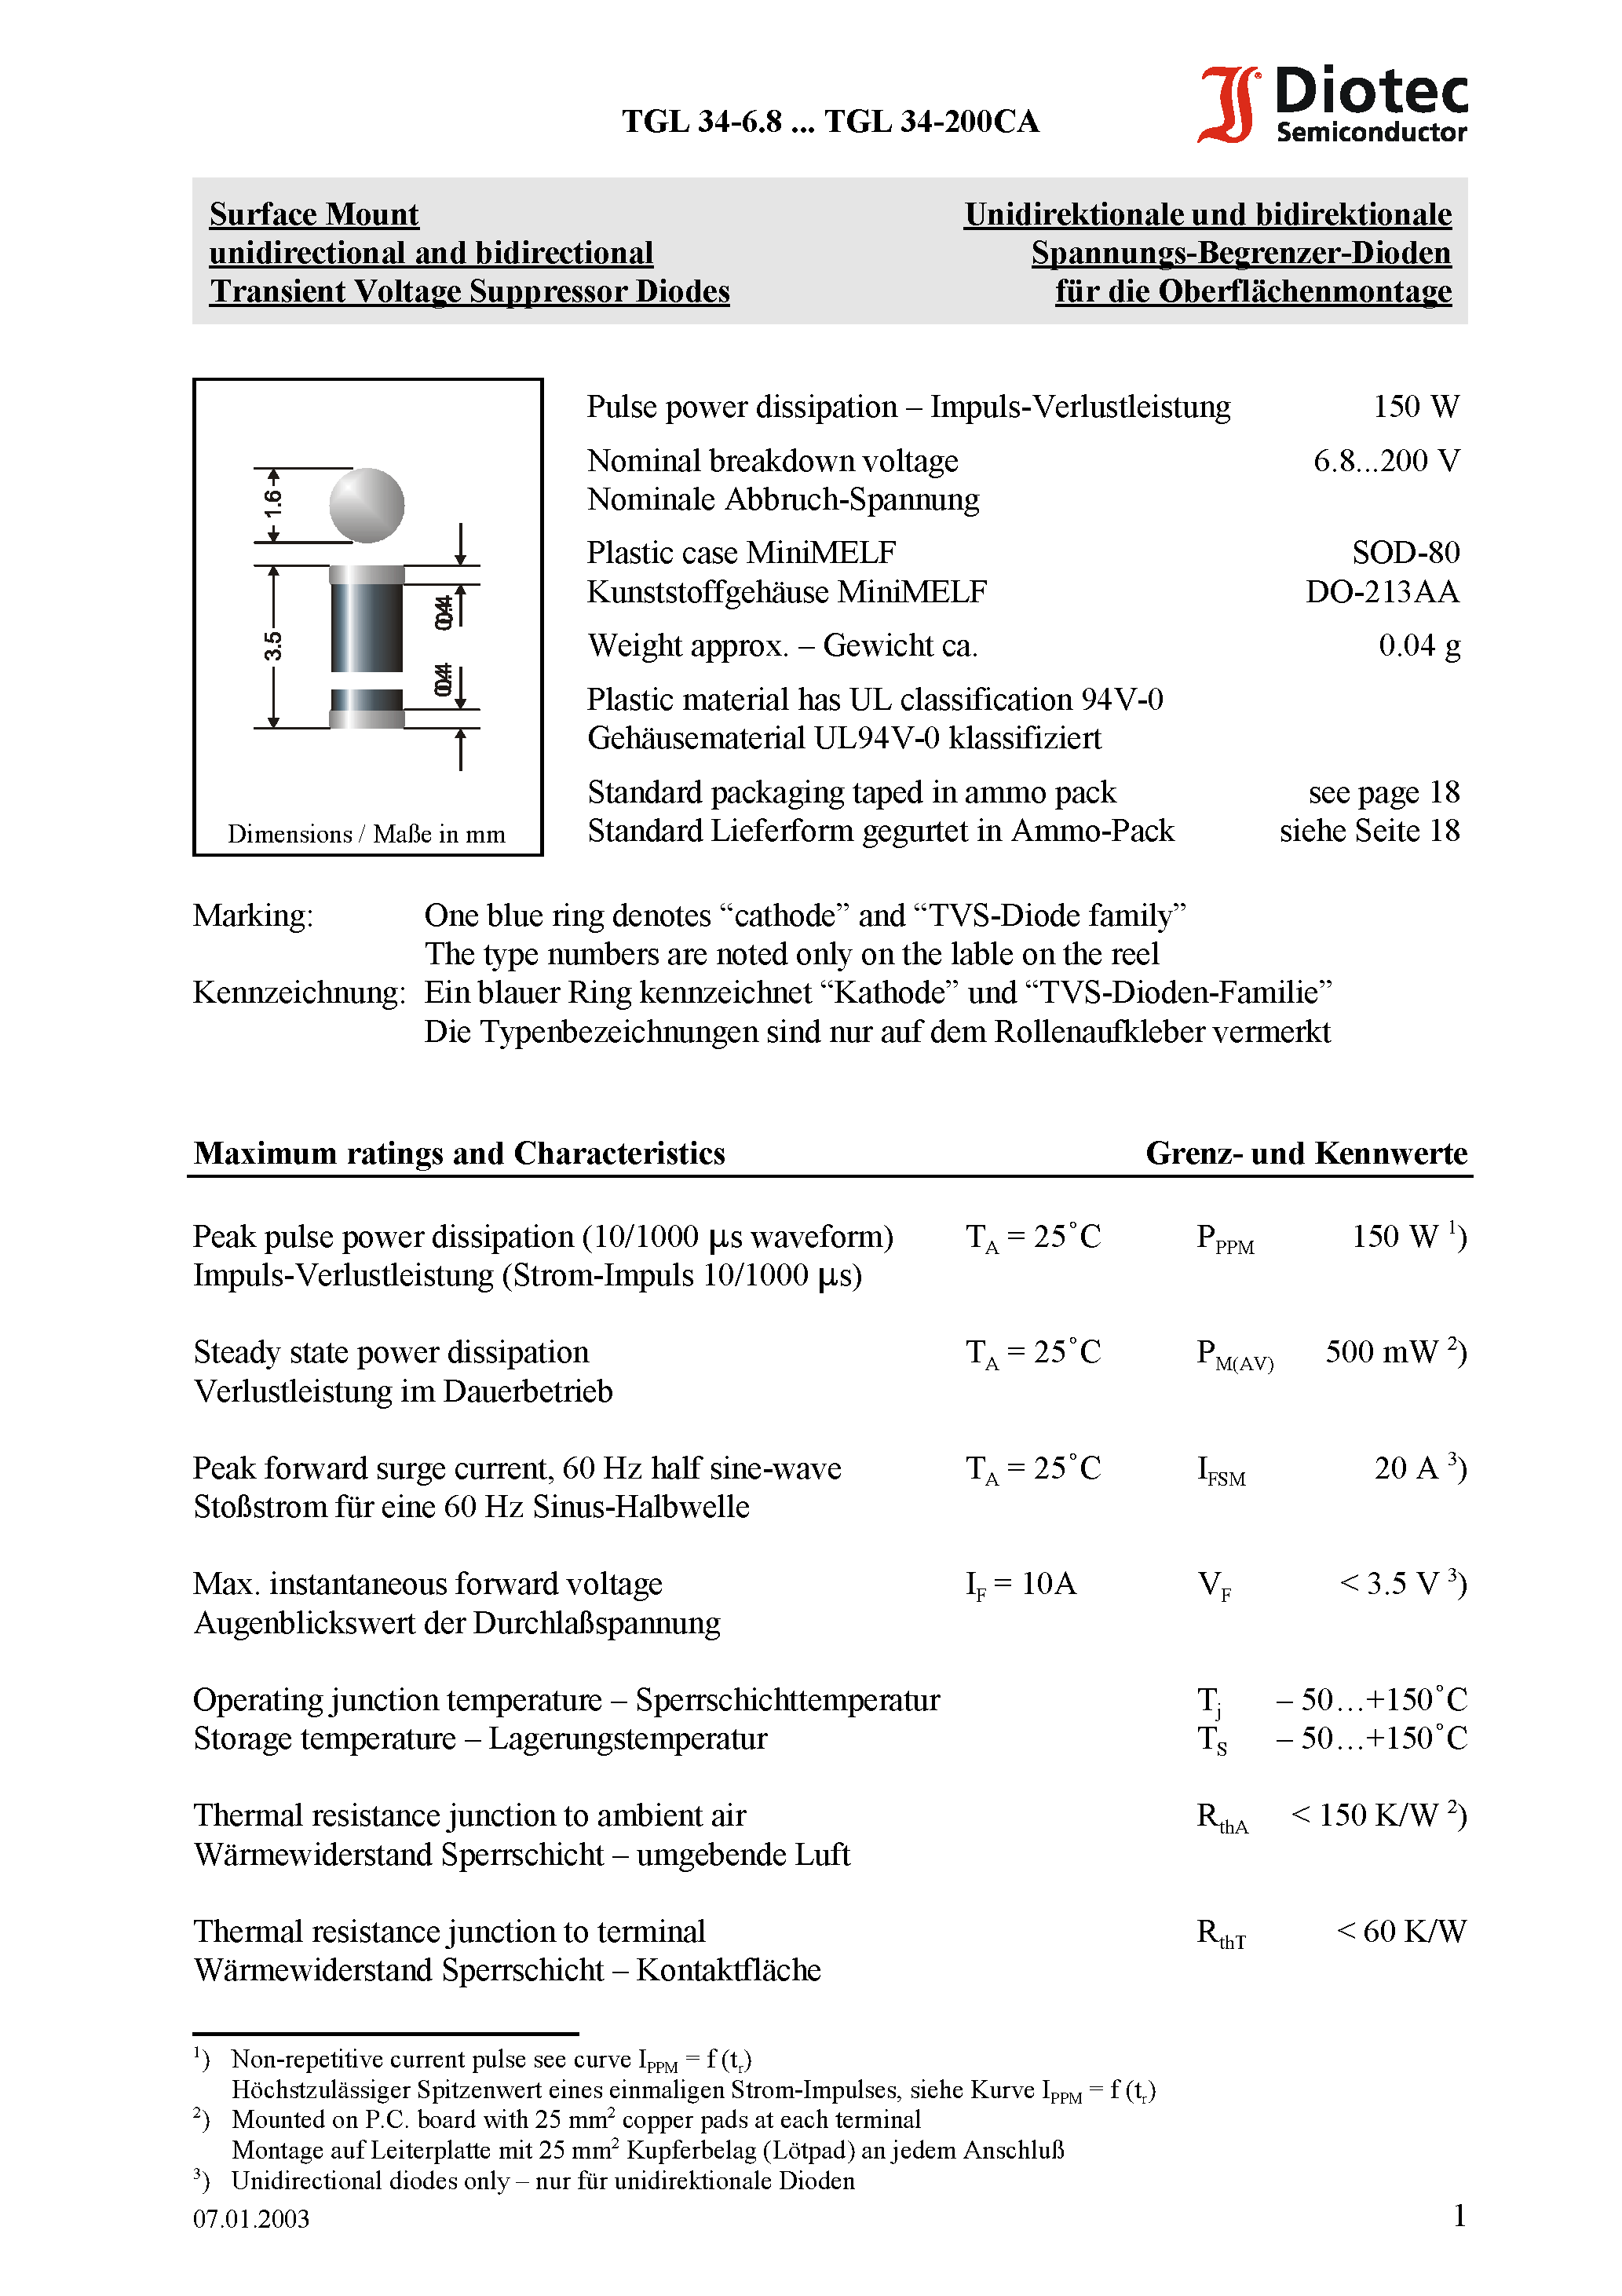 Datasheet TGL34-6.8A - Surface Mount unidirectional and bidirectional Transient Voltage Suppressor Diodes page 1